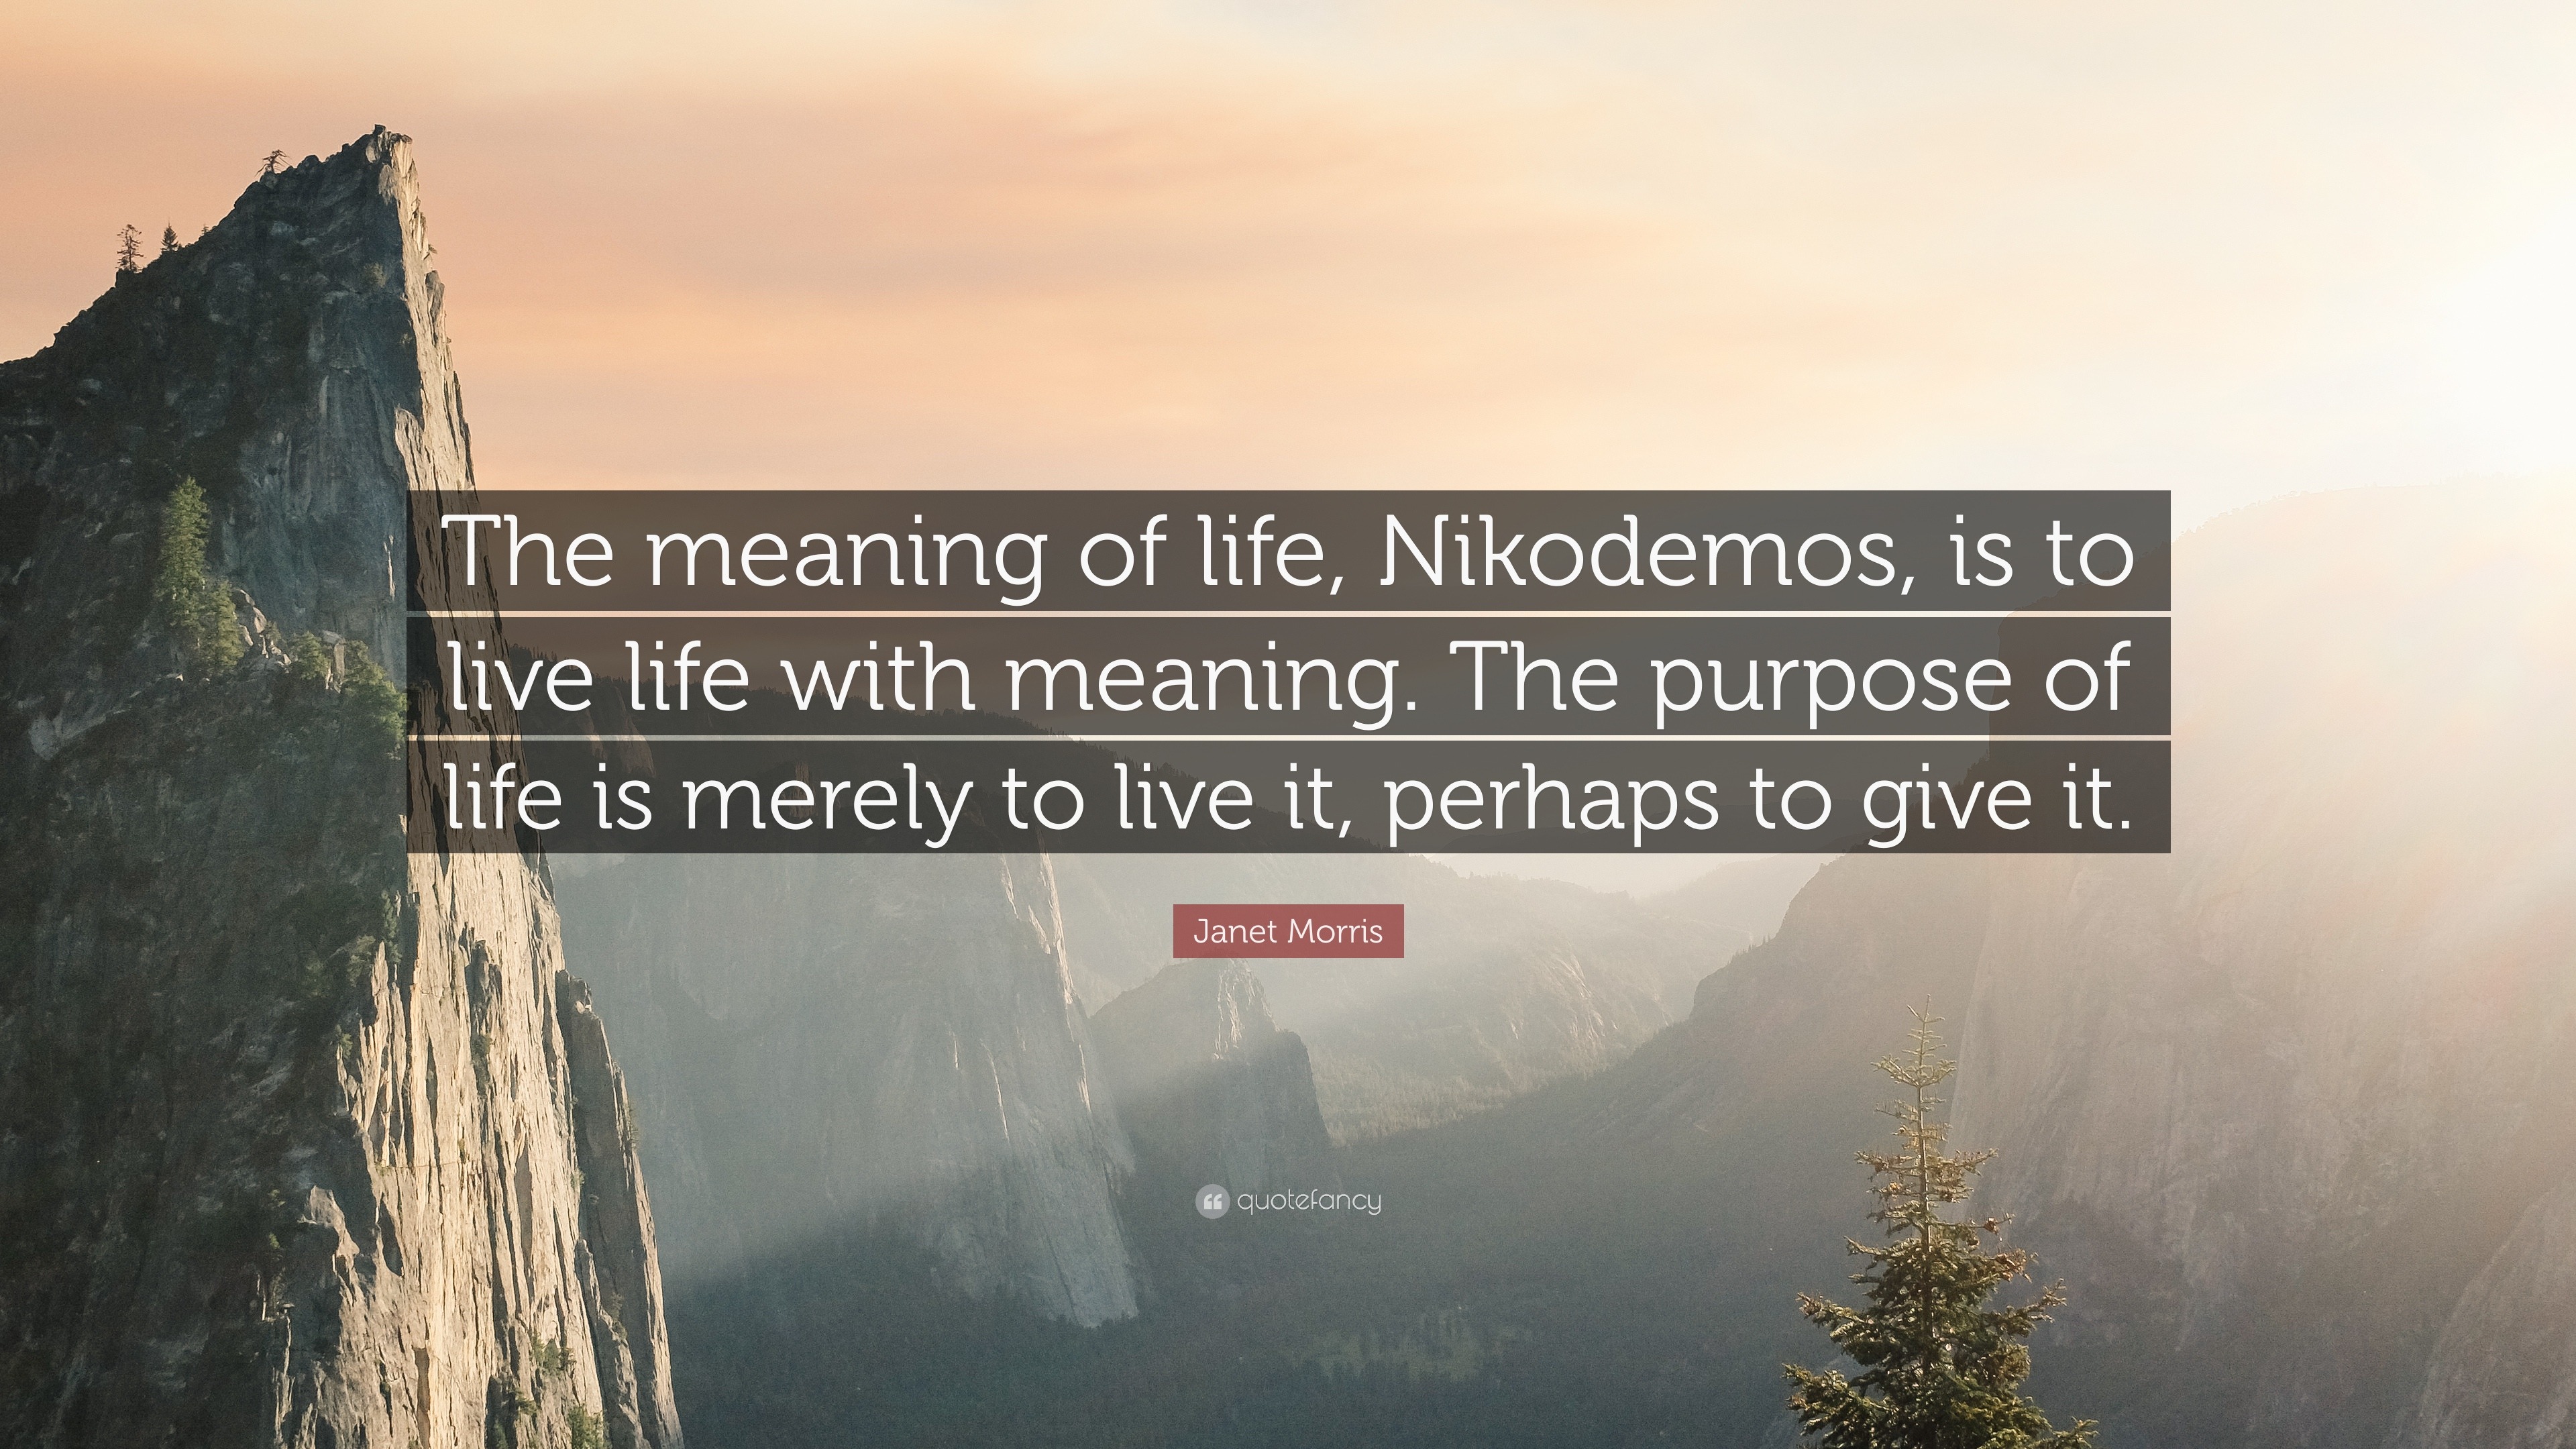 Janet Morris Quote The Meaning Of Life Nikodemos Is To Live Life With Meaning The Purpose Of Life Is Merely To Live It Perhaps To Give